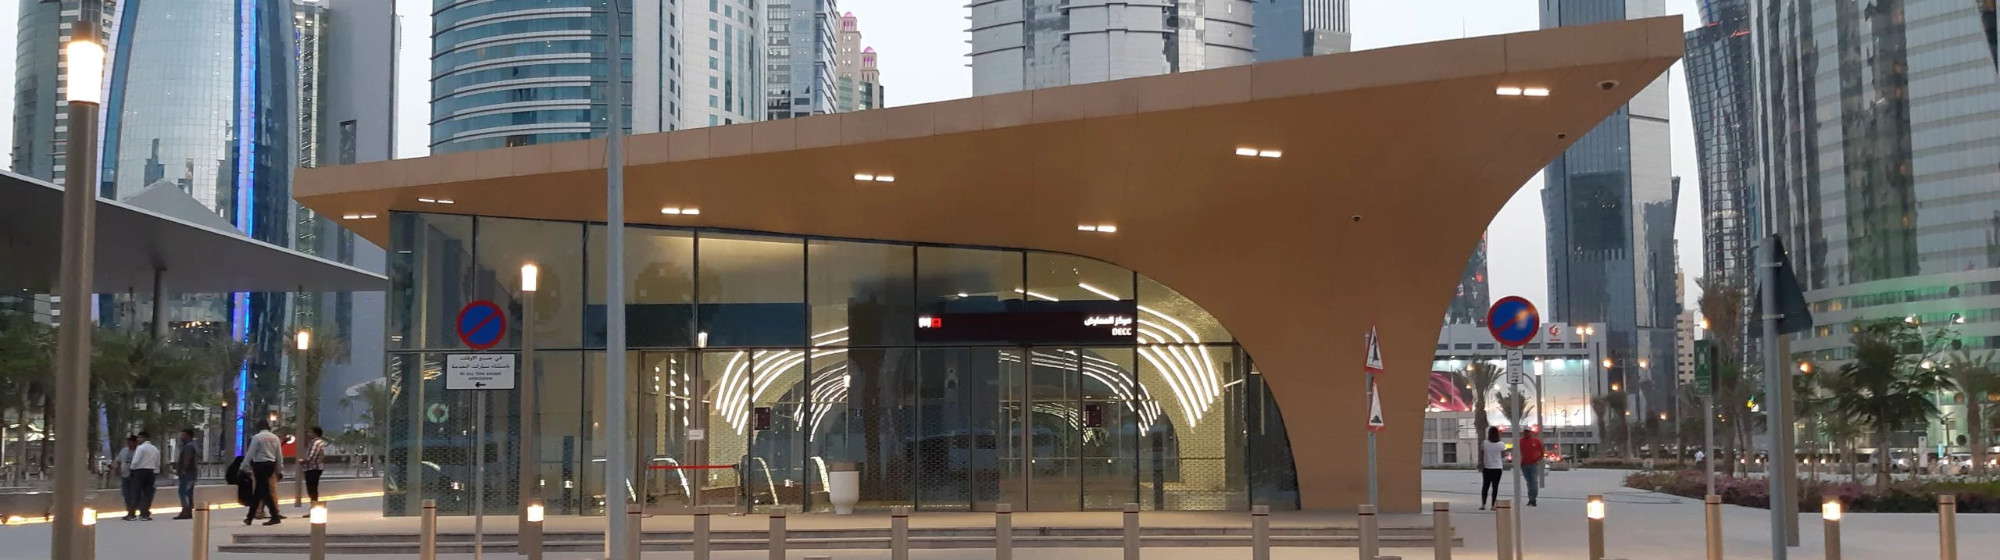 Metro station in Doha close to the DECC